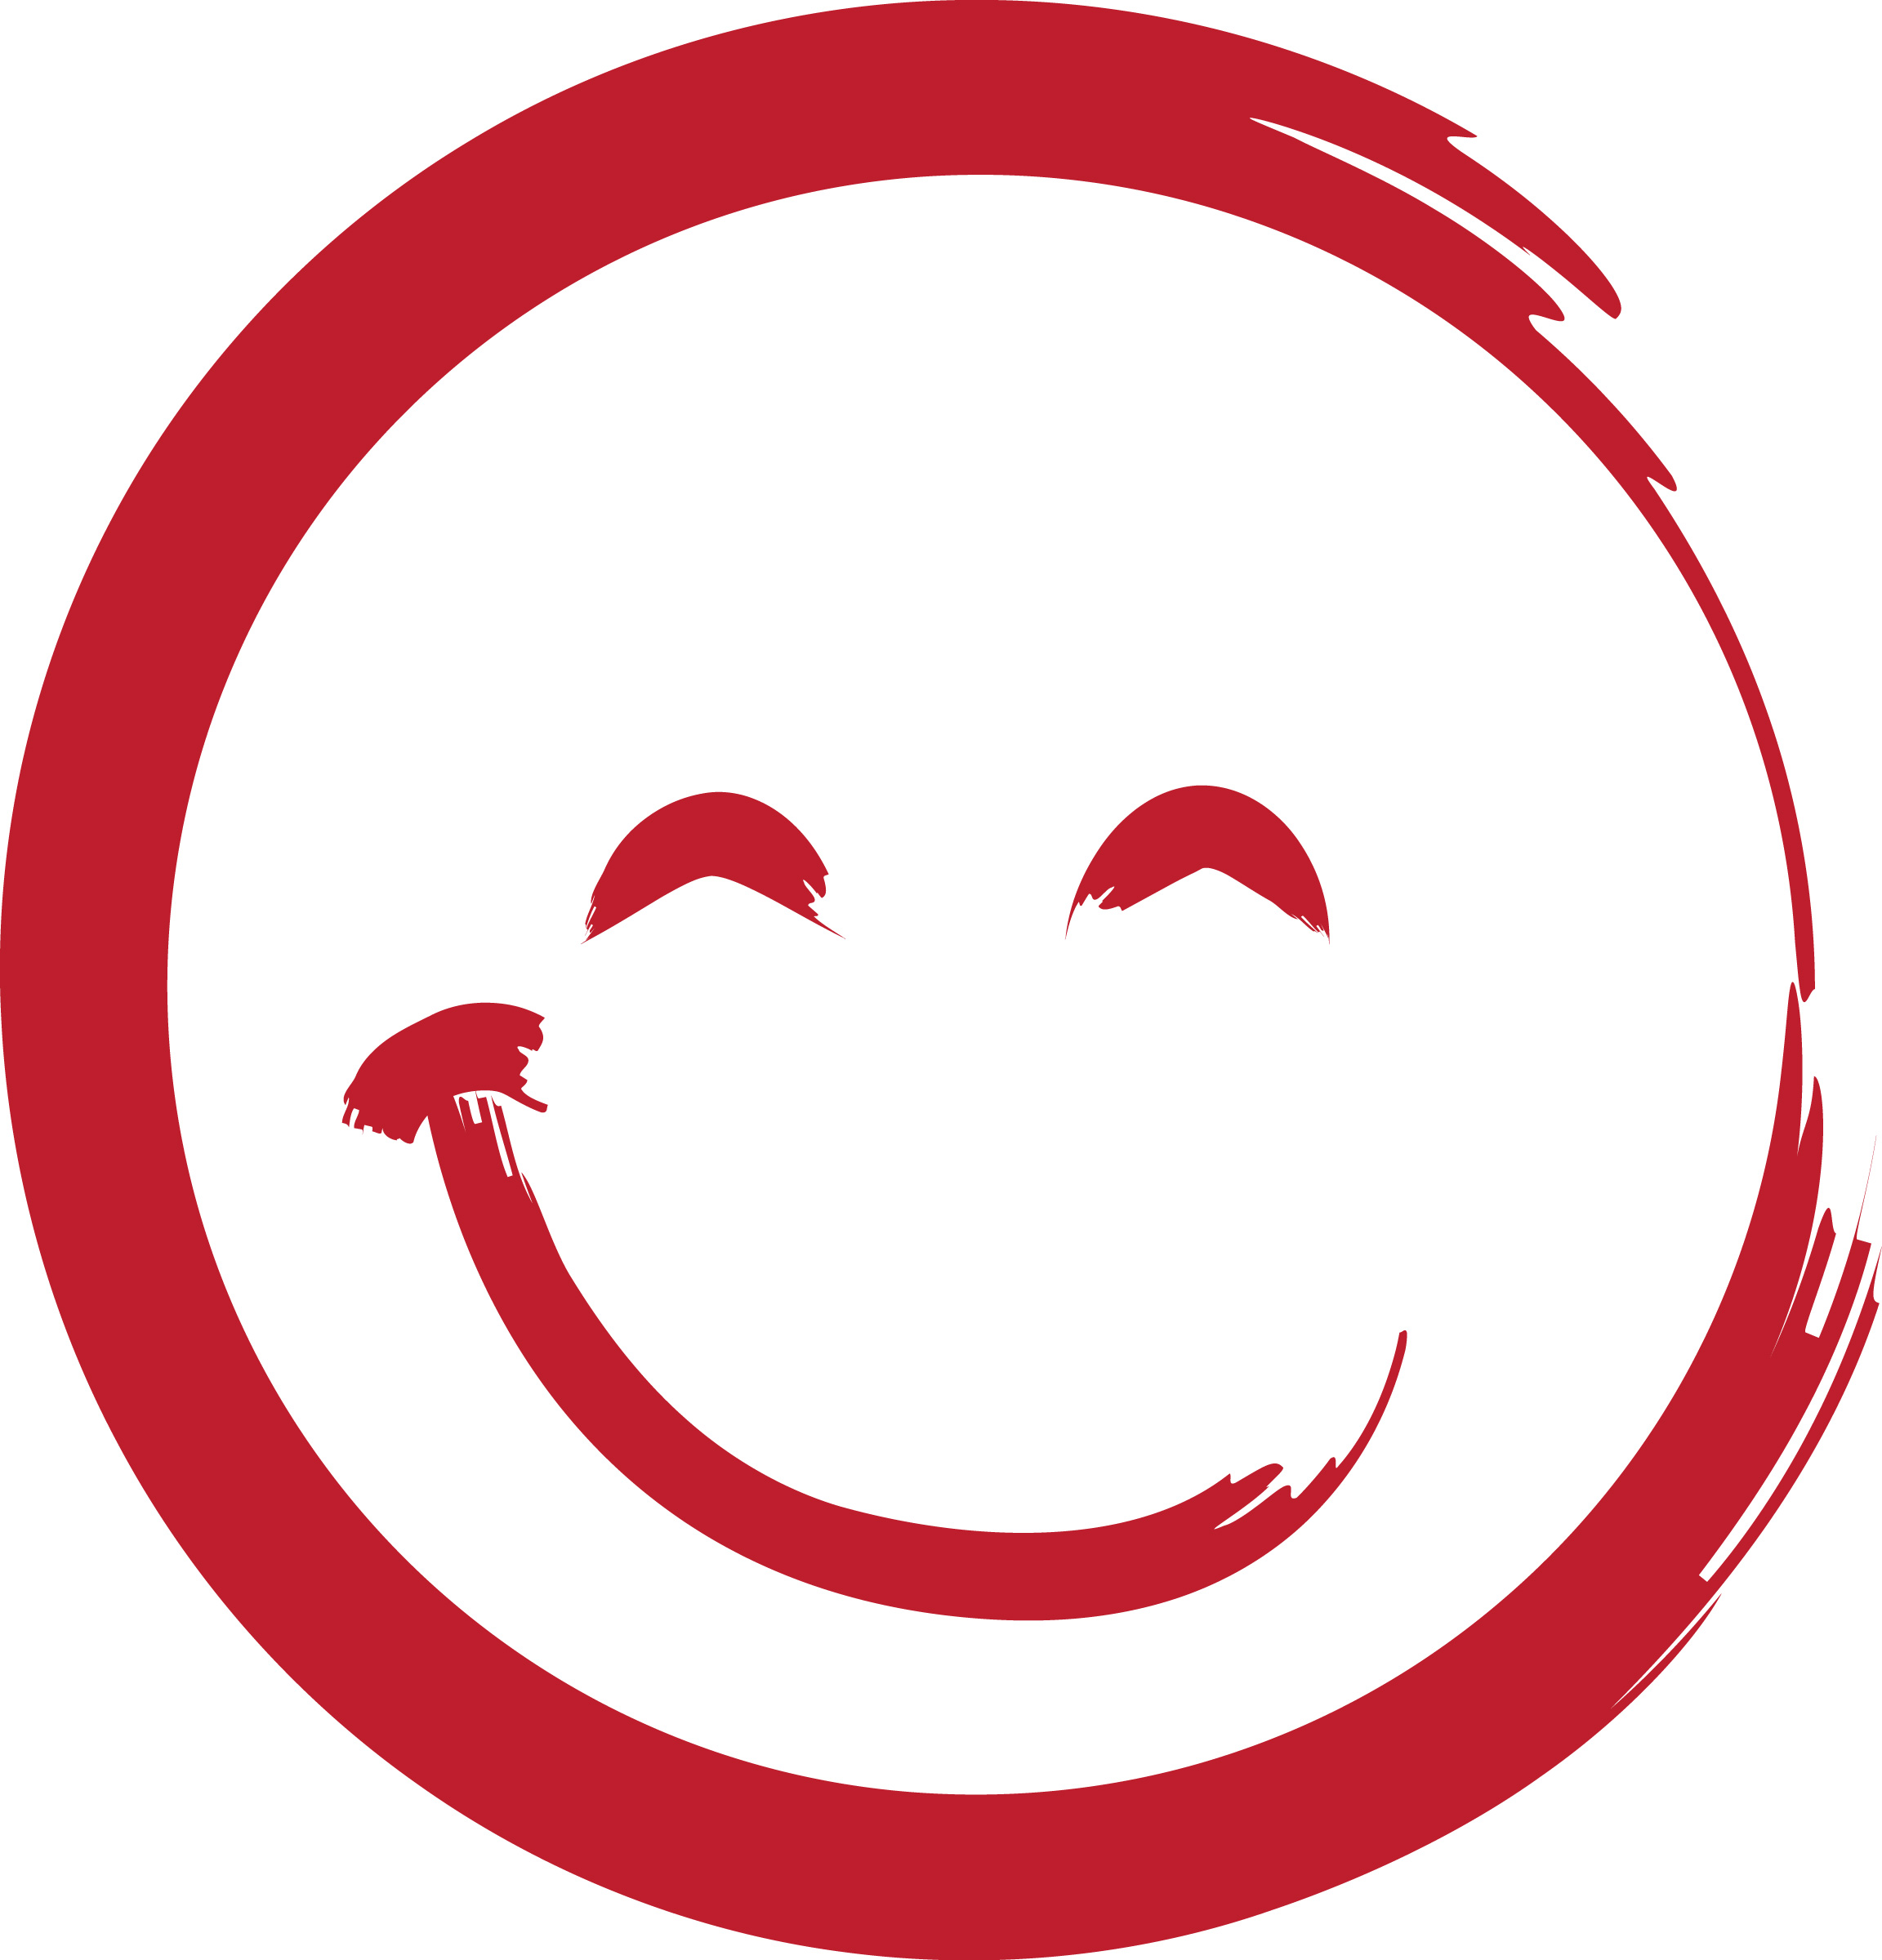 Red Smiley Face - ClipArt Best